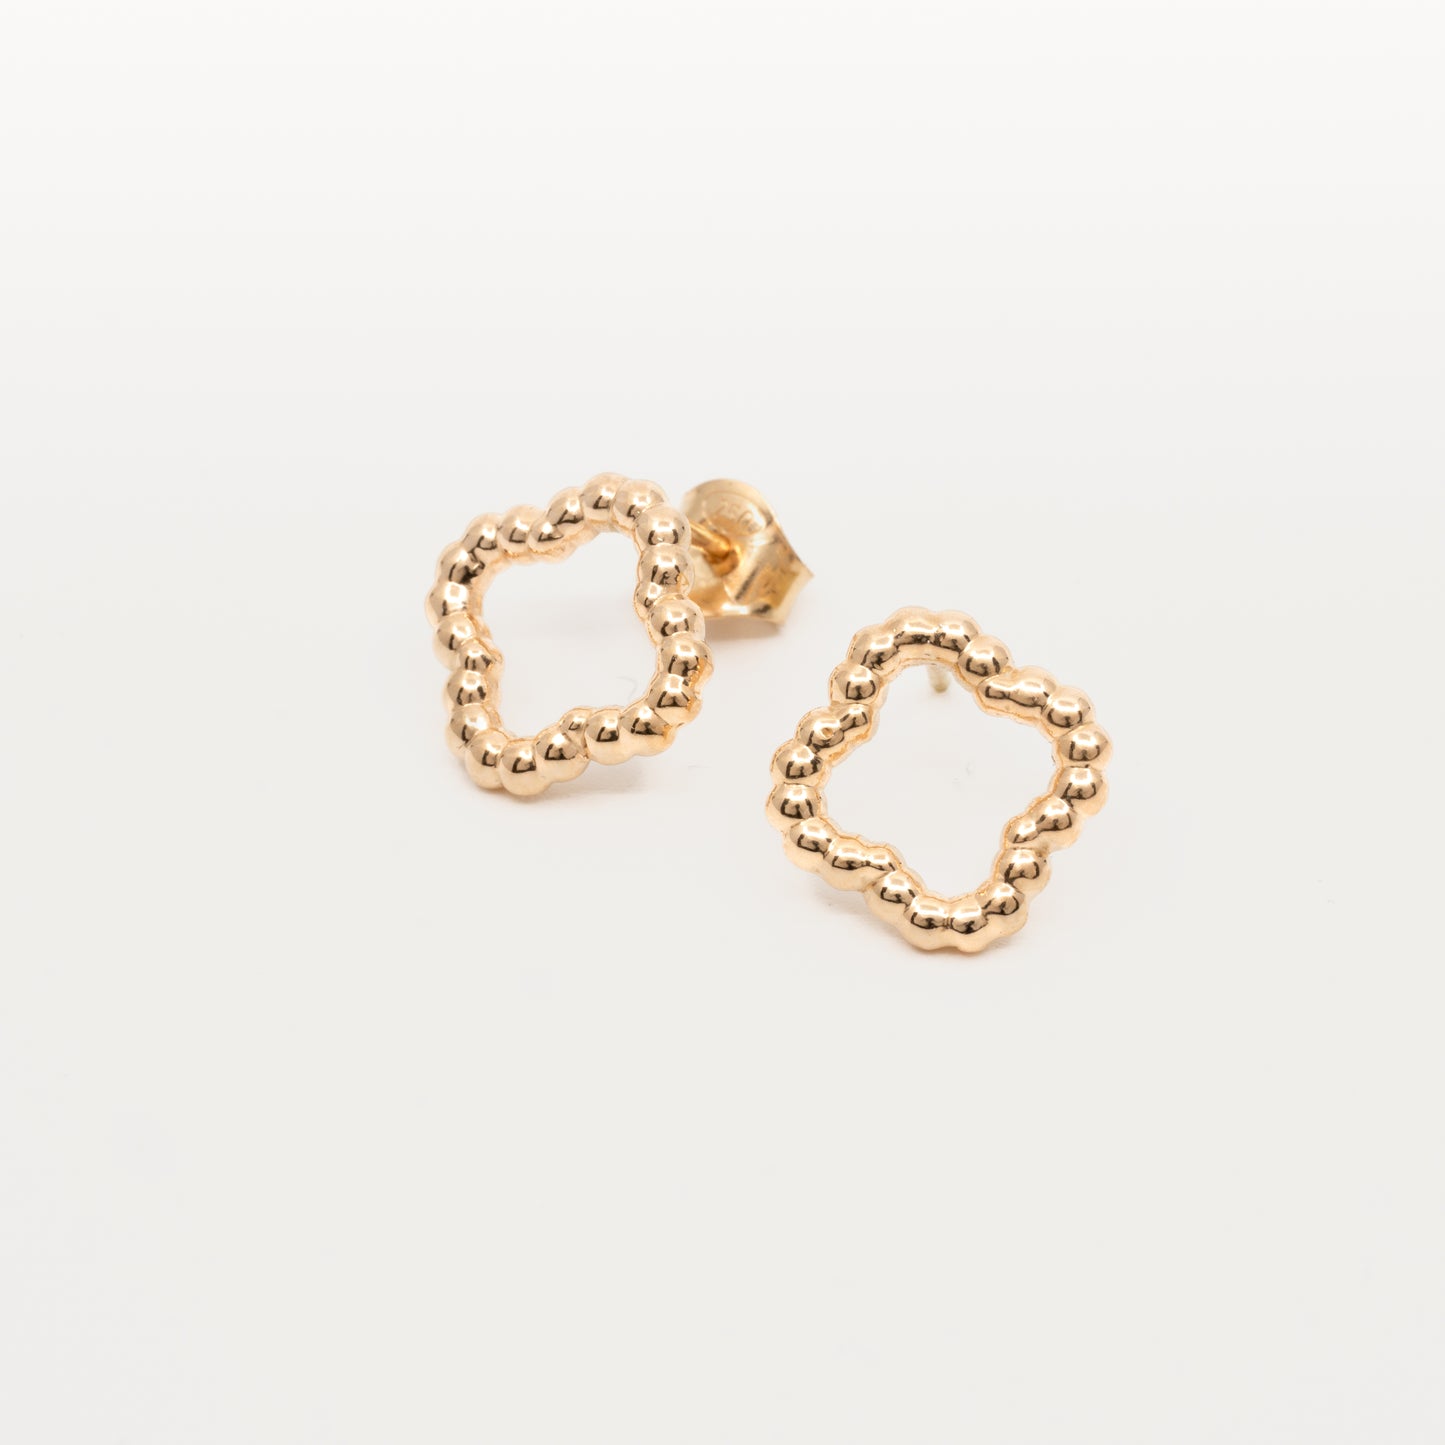 Creo Marbles - Gold earrings